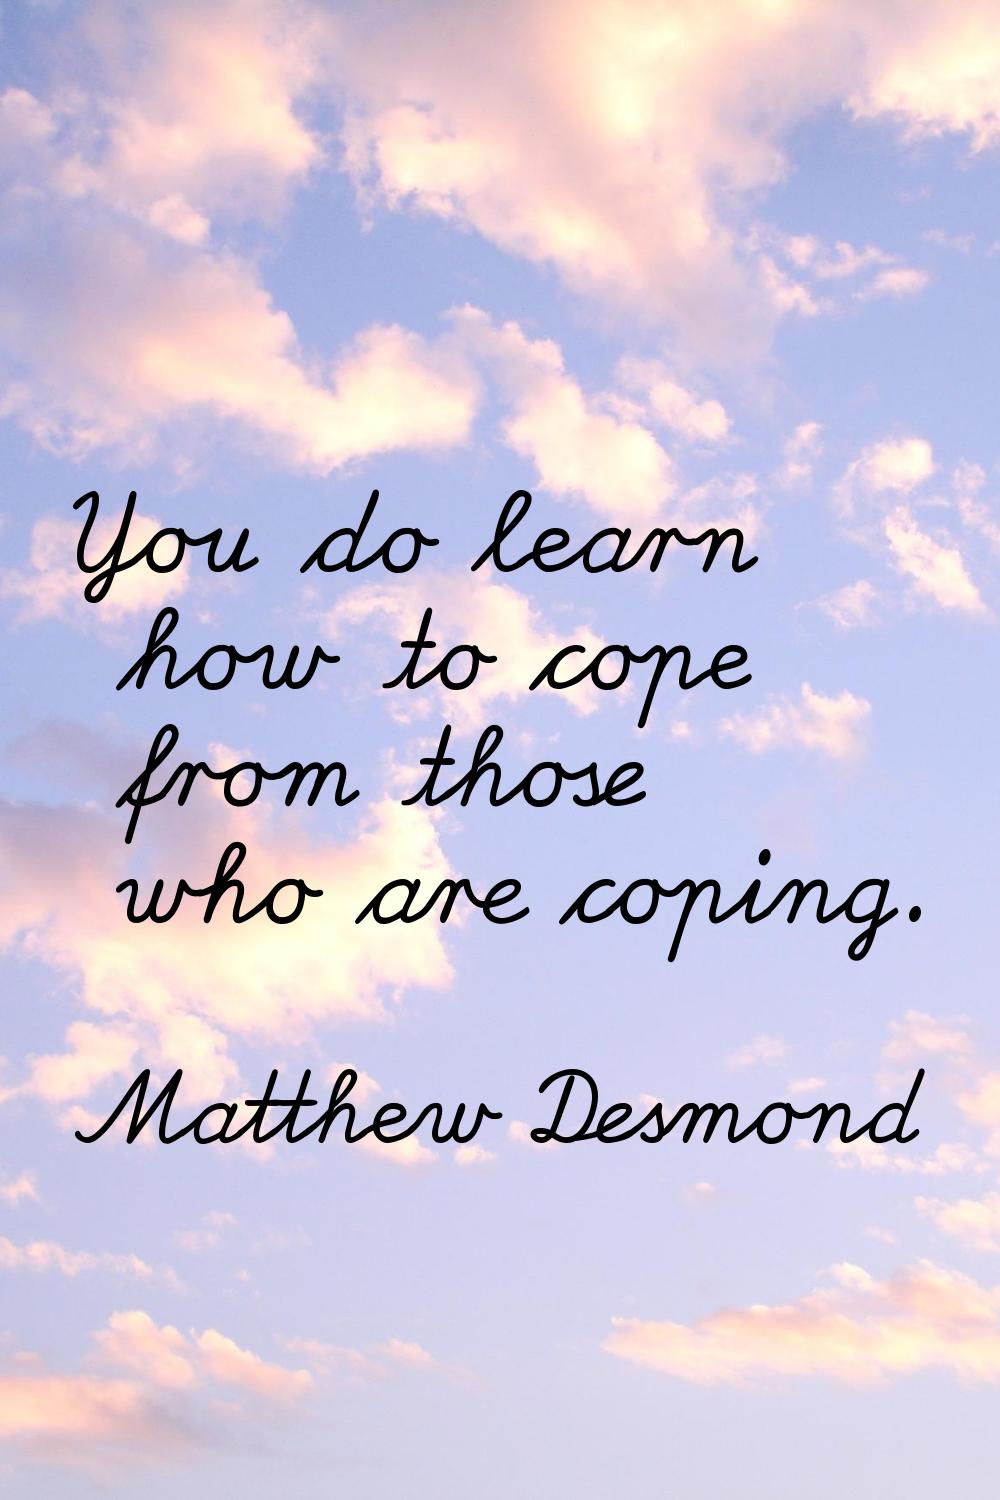 You do learn how to cope from those who are coping.